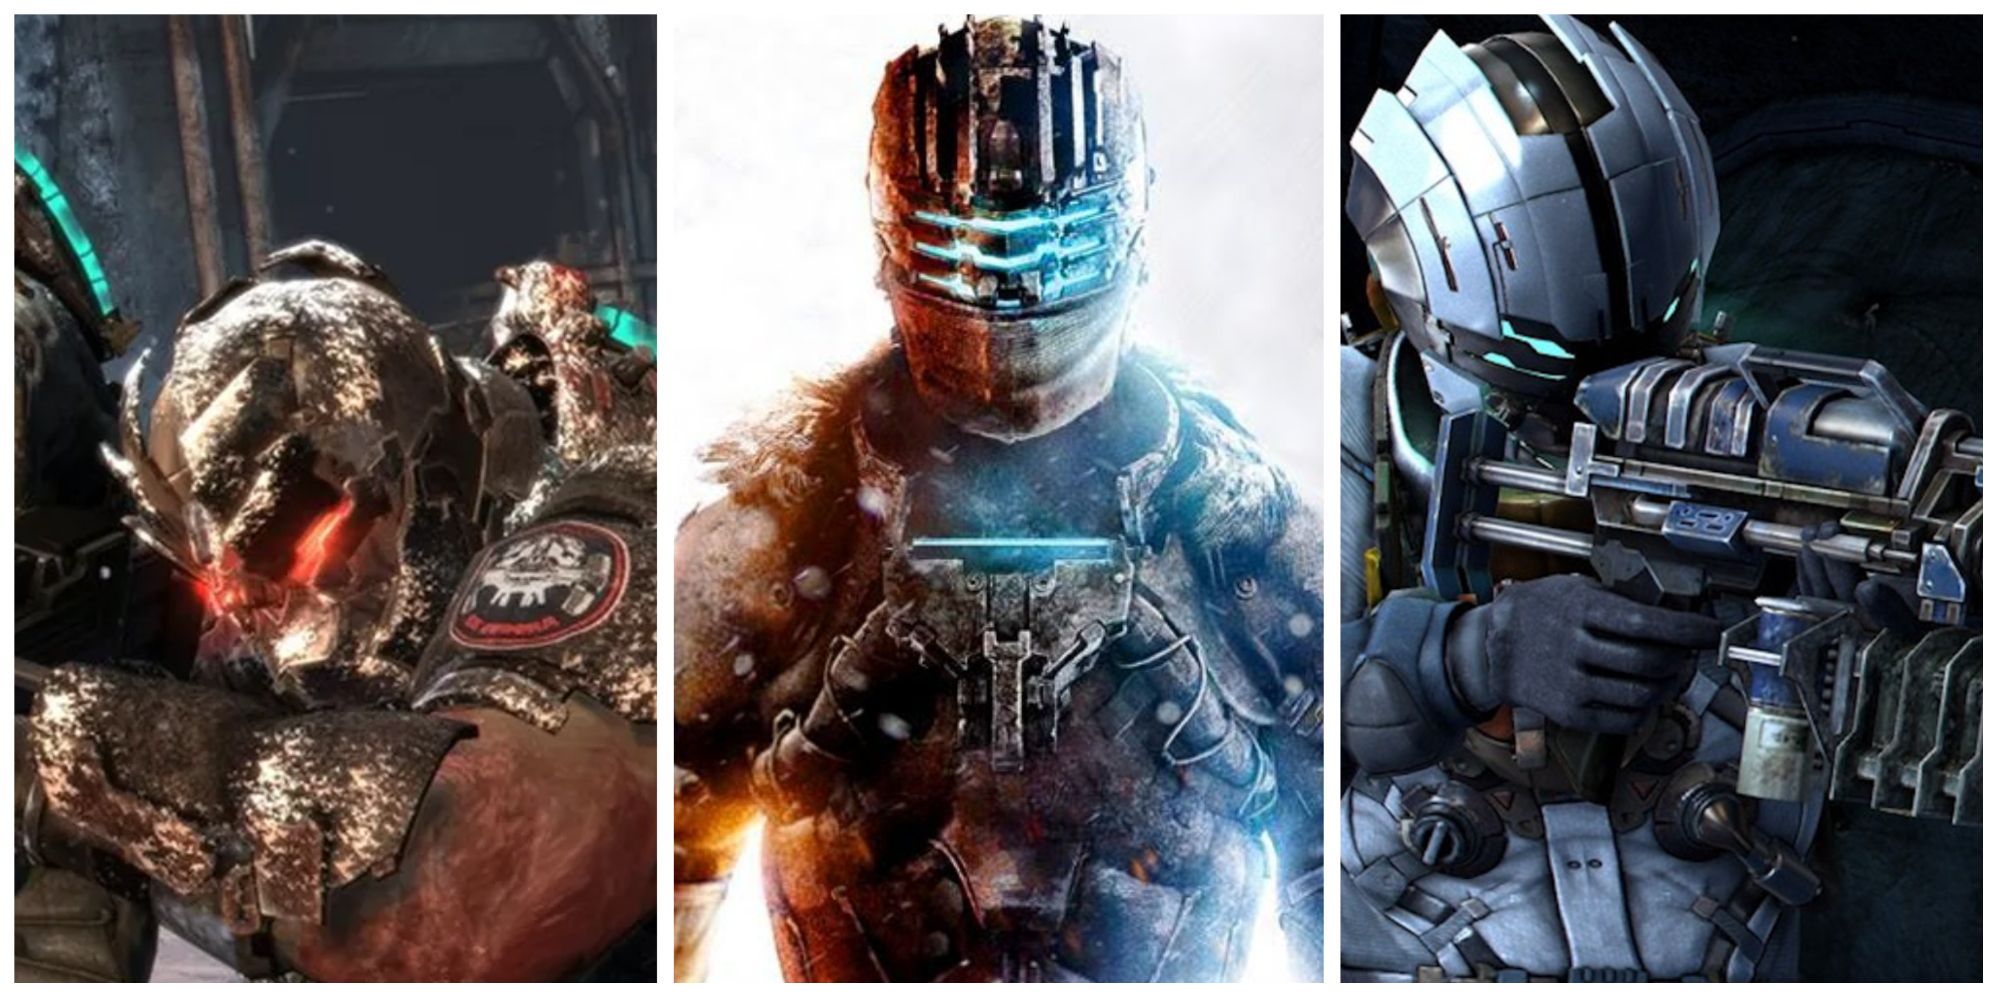 john carver, isaac clarke and dead space 3 cover art